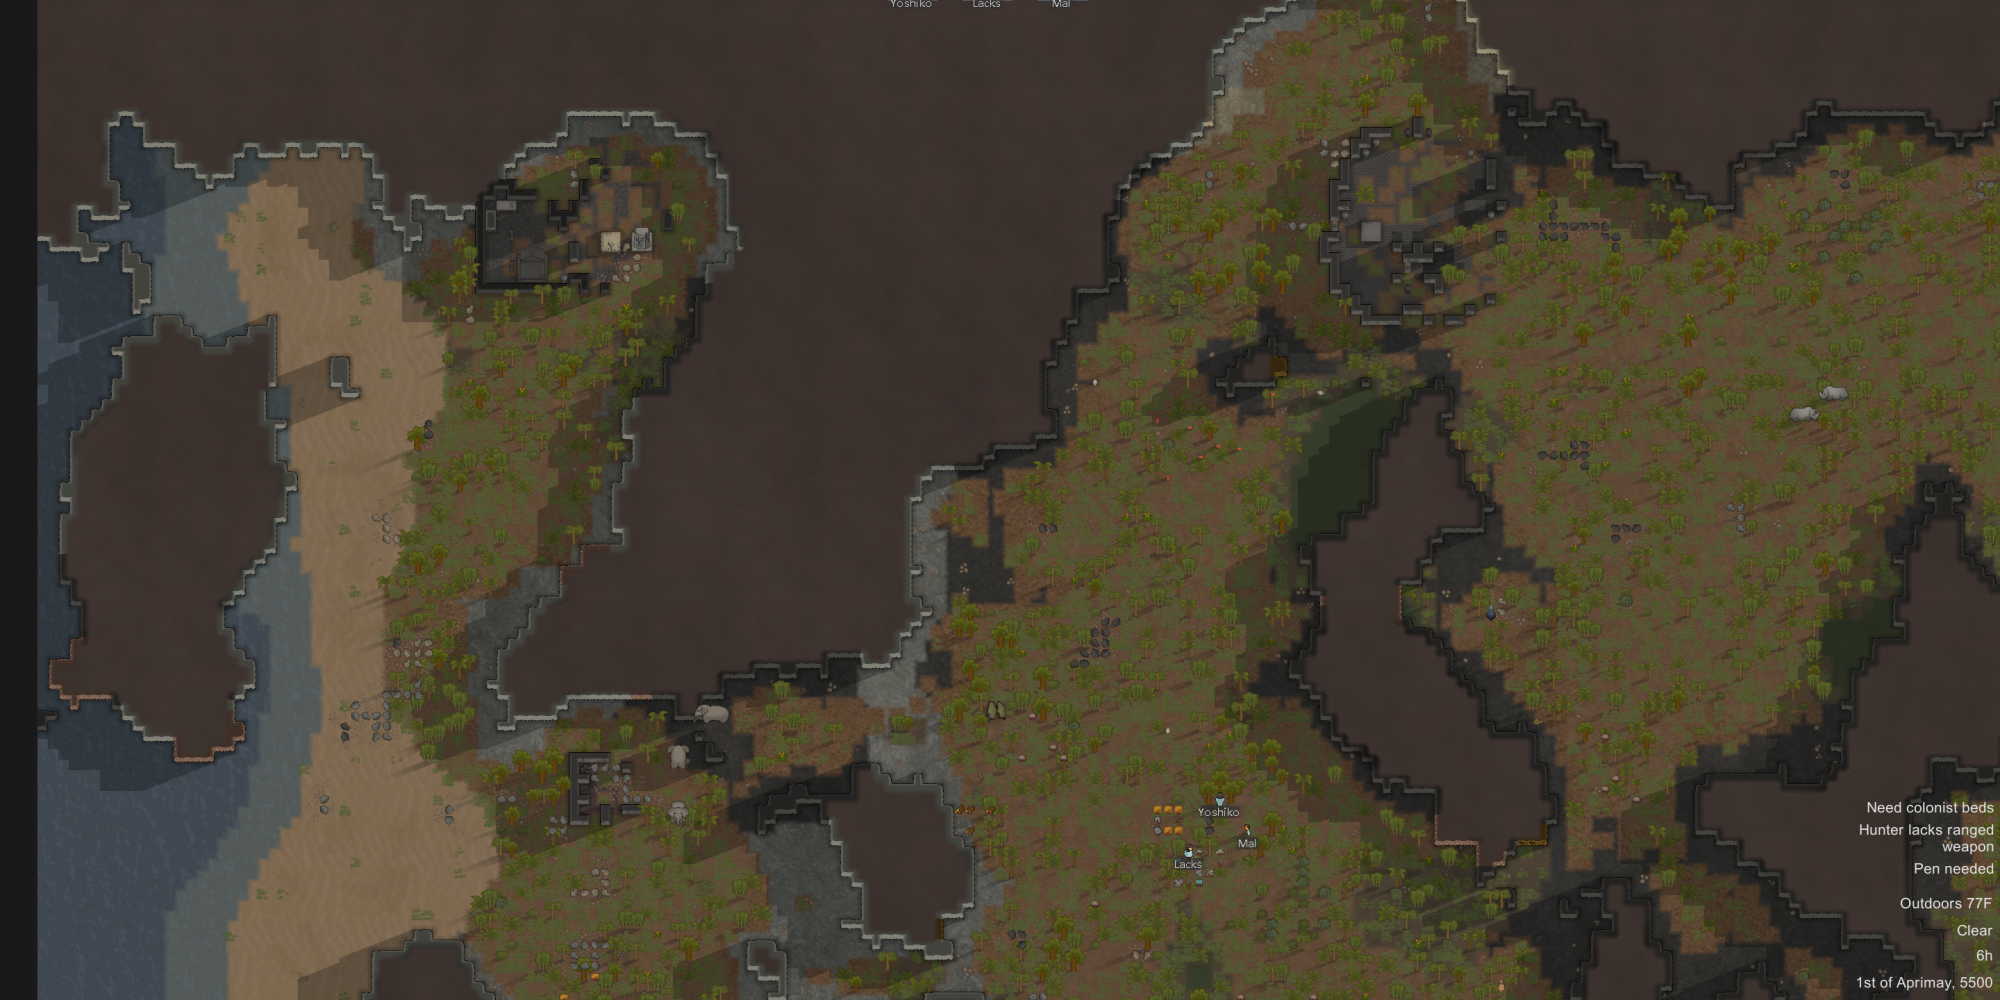 Tropical map tile from the 100ManTest seed in Rimworld